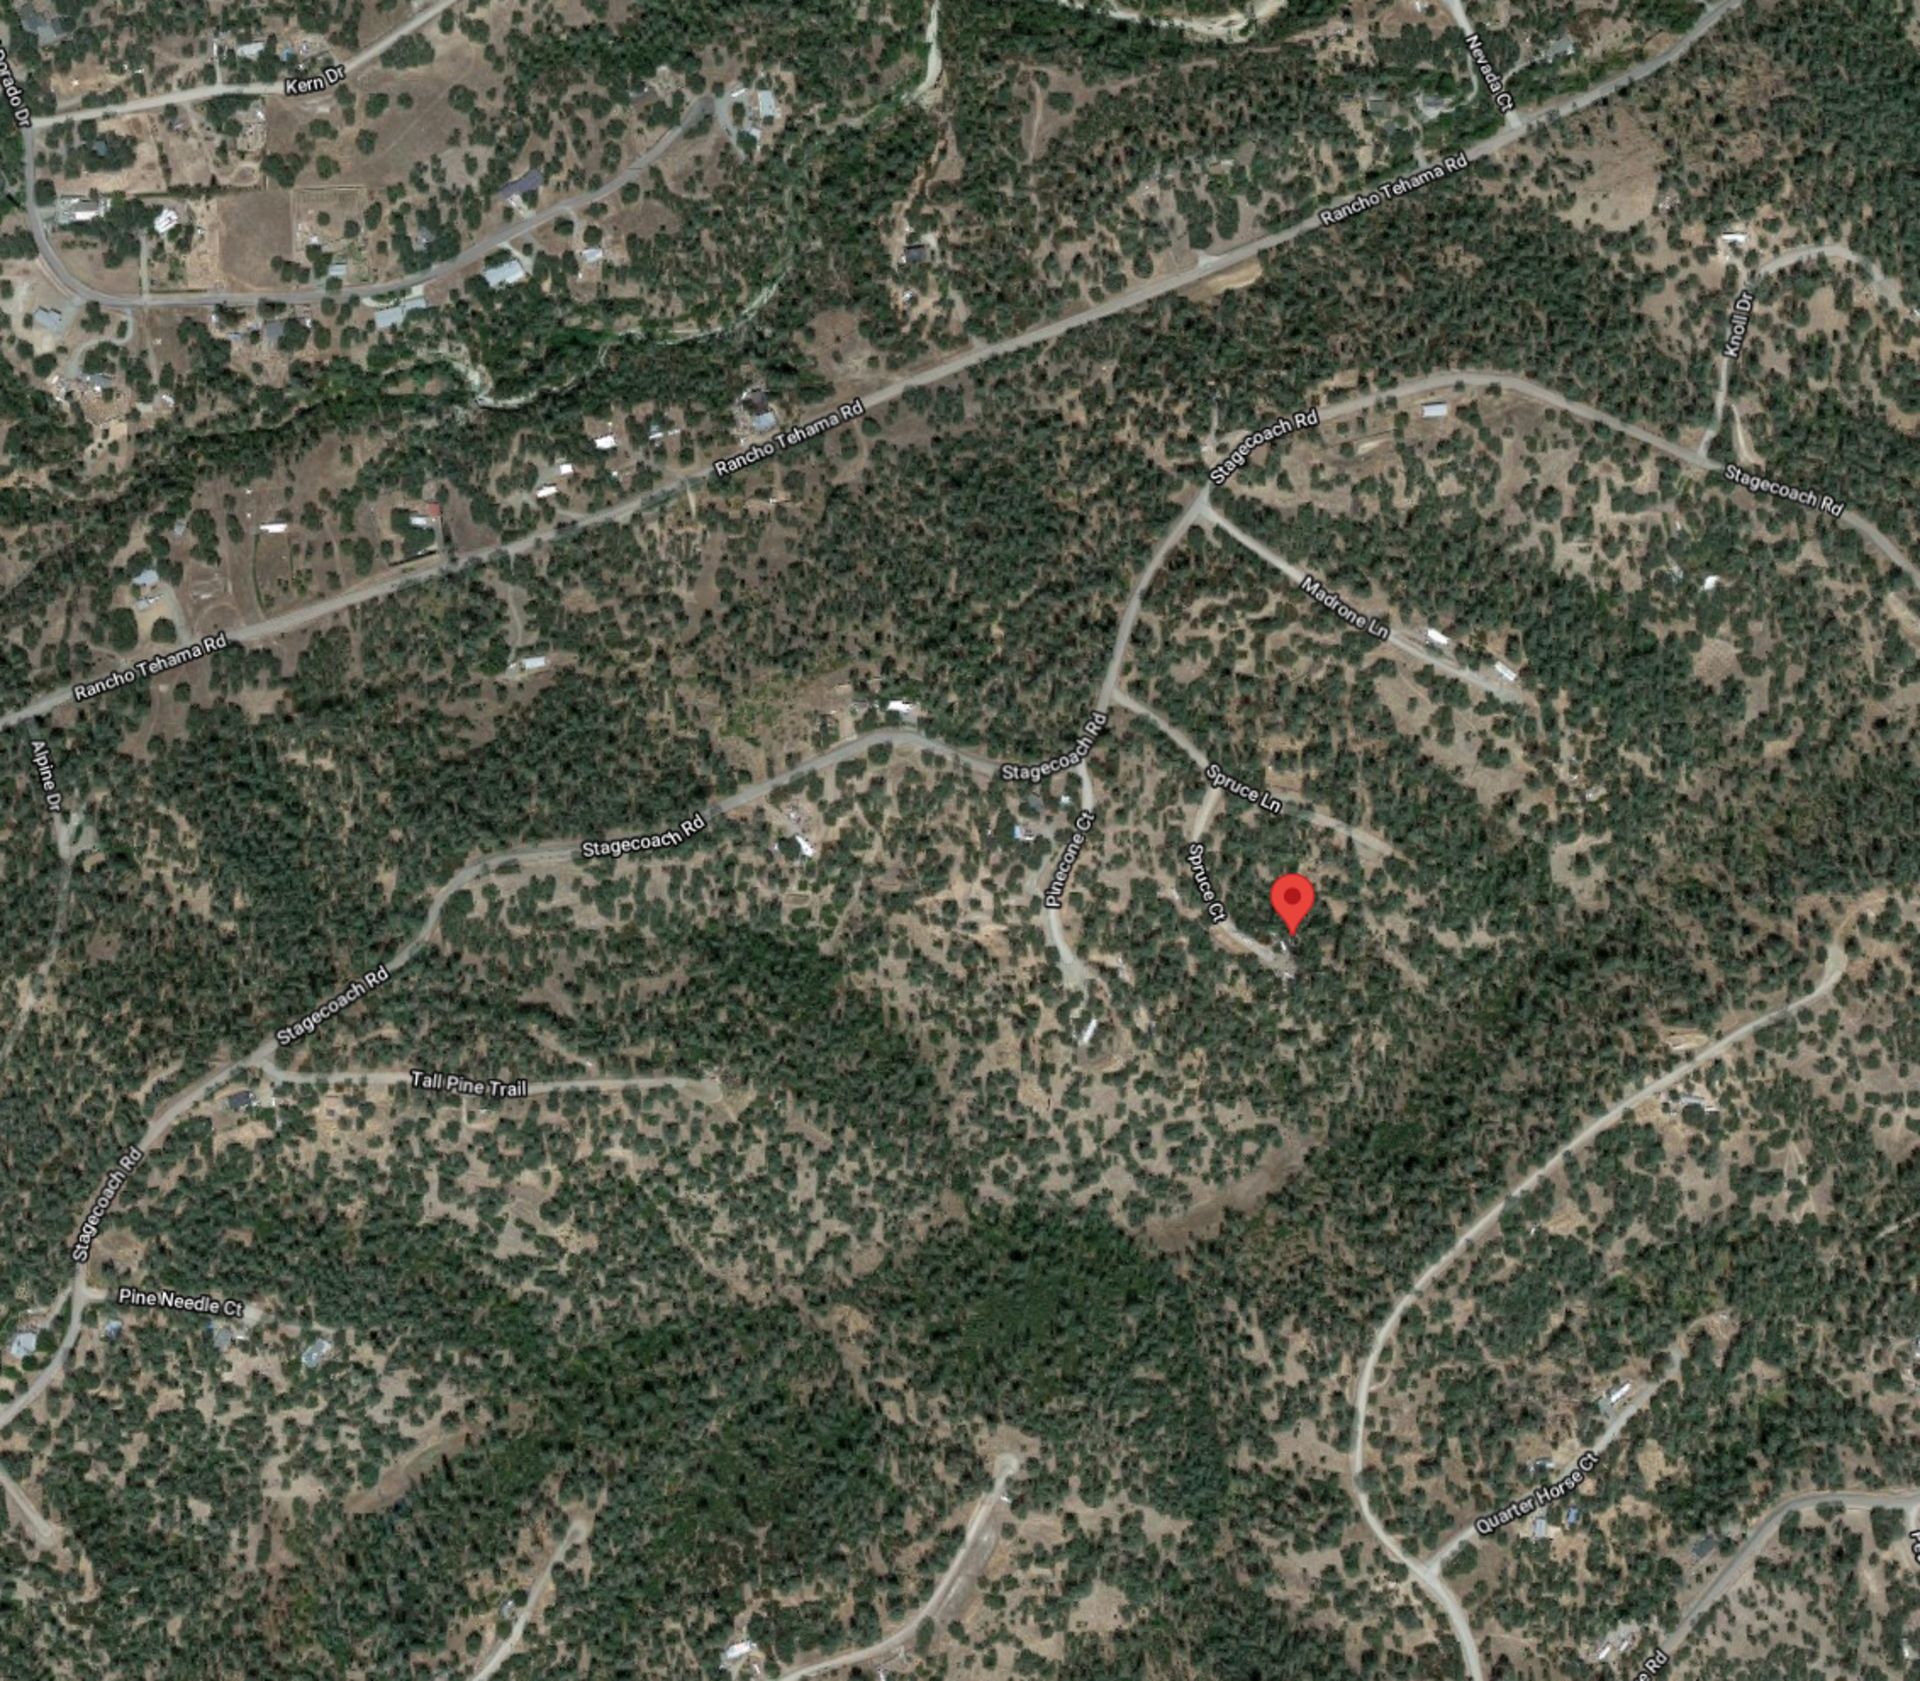 Build Your Home on an Over 1.33 Acre Lot in this Northern California Paradise! - Image 5 of 7